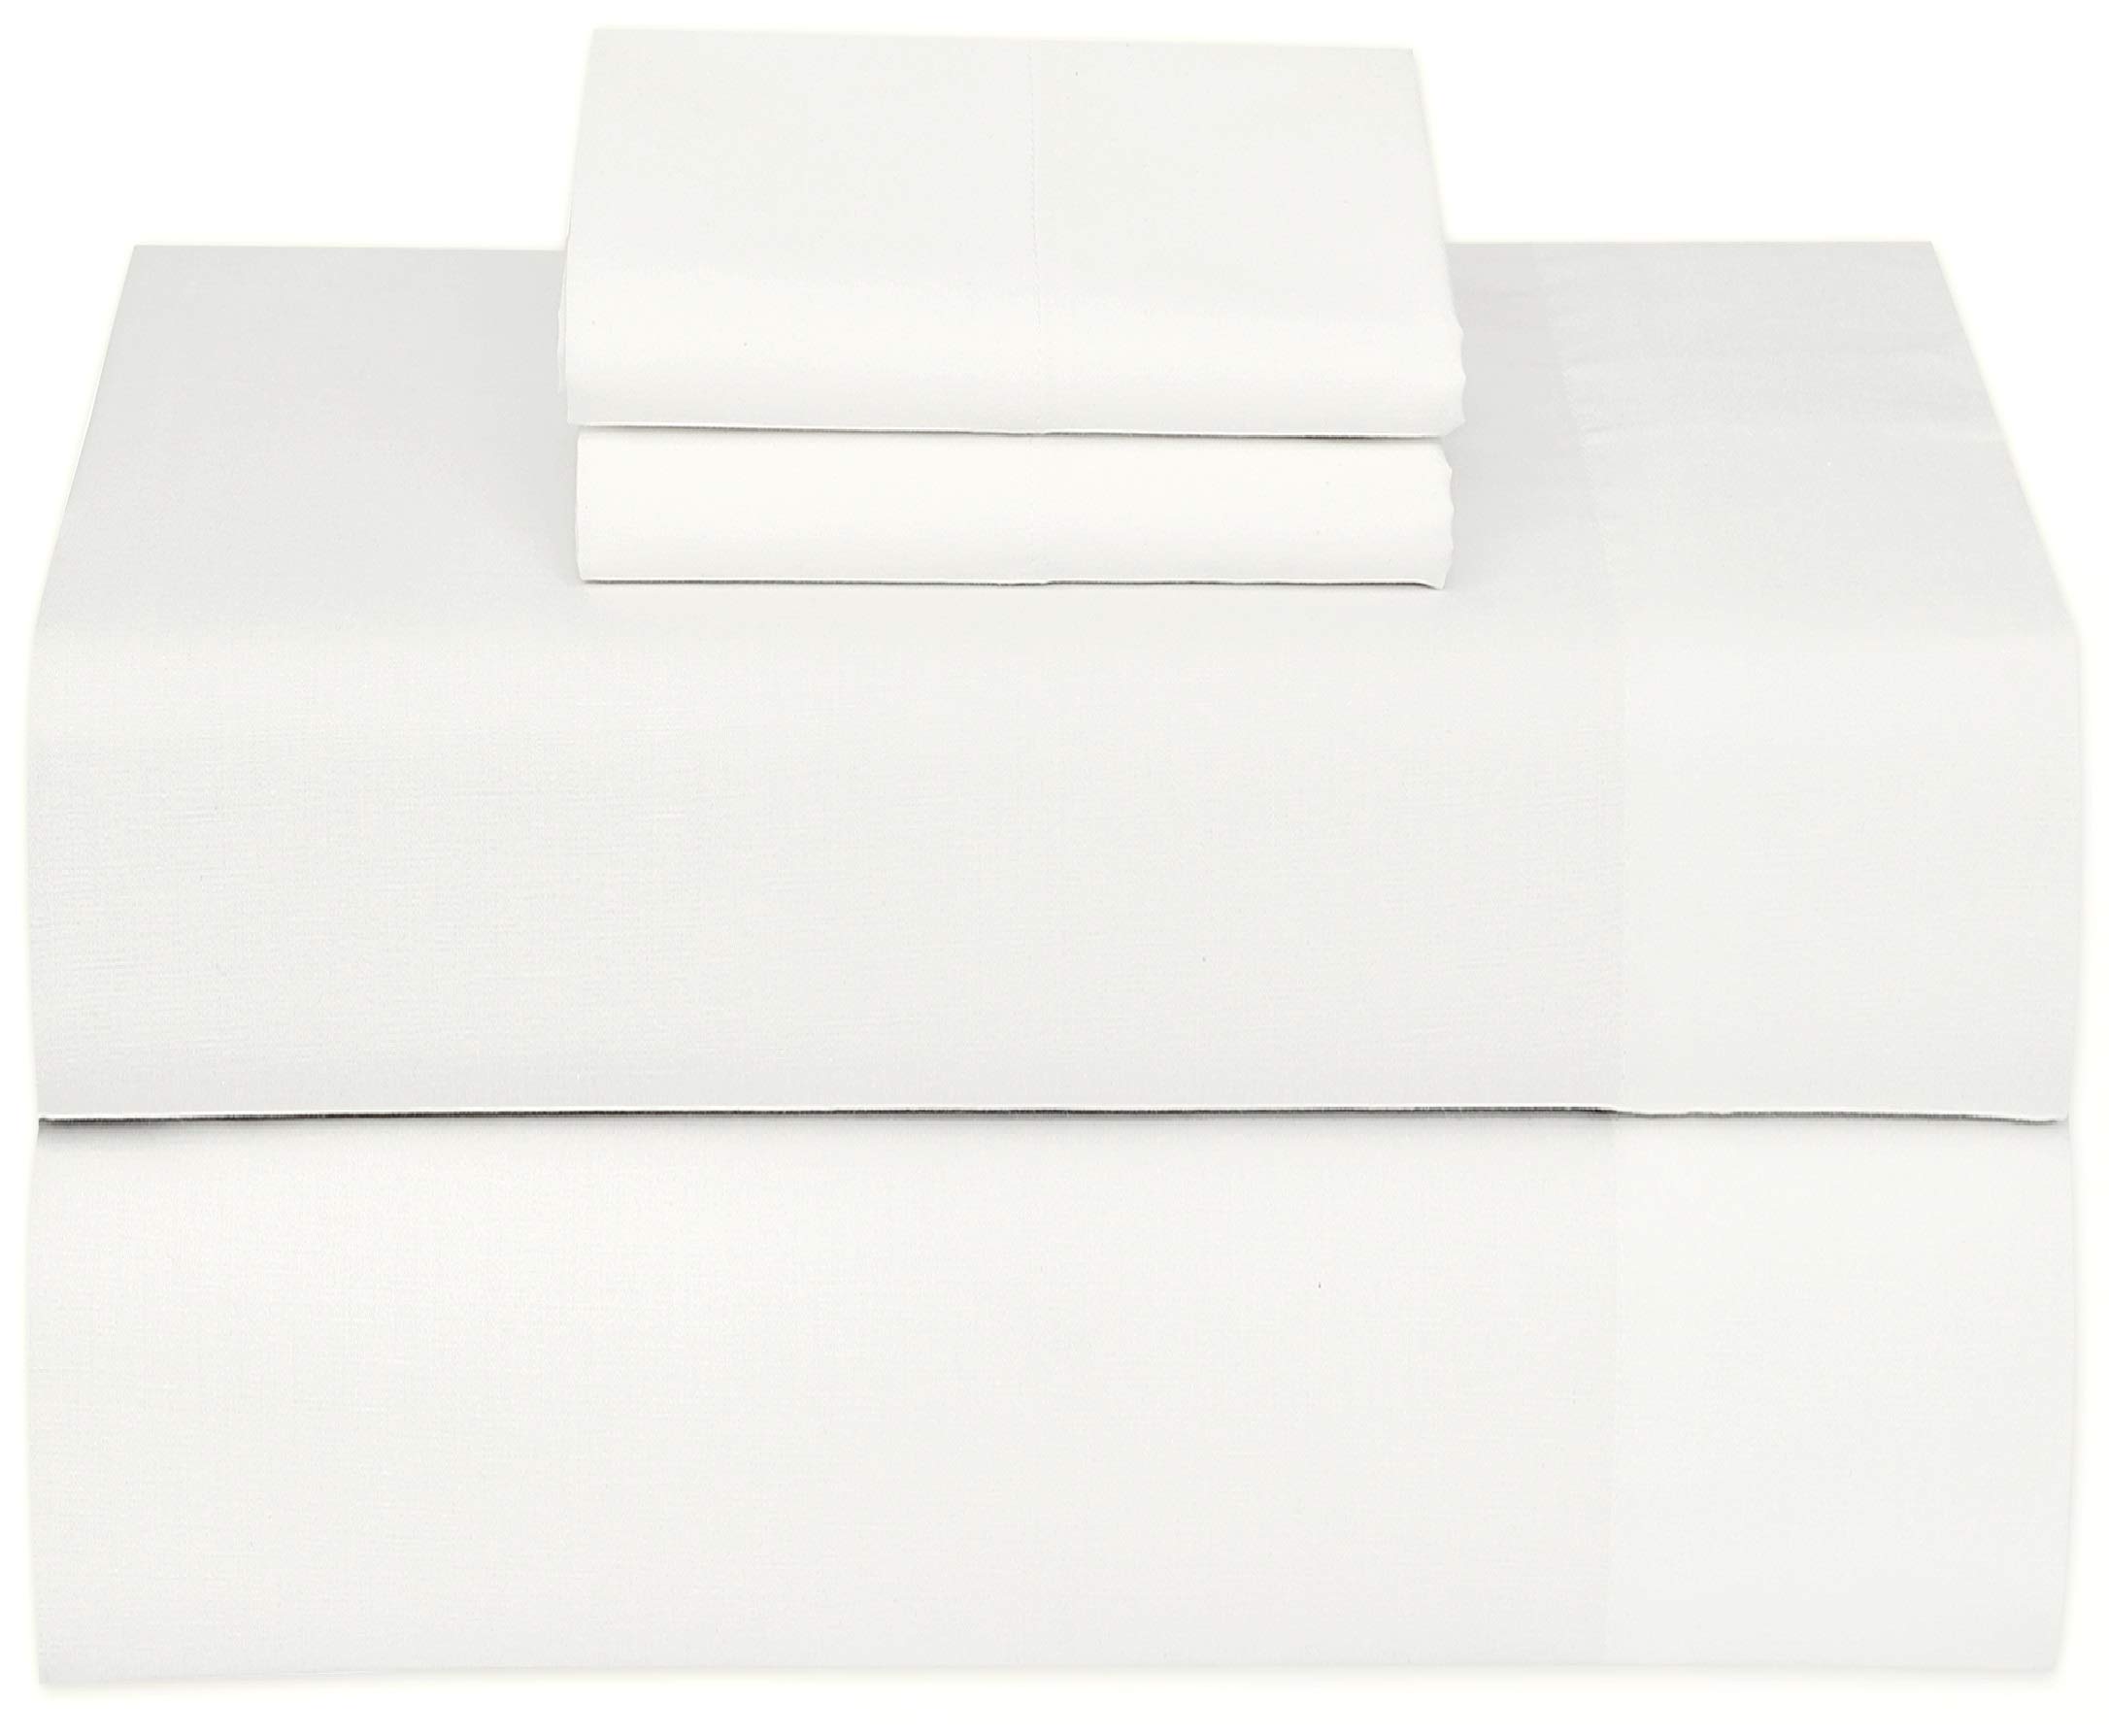 Book Cover Ruvanti 100% Cotton 4 Piece Jersey Creamy White Fabric Sheets Queen Deep Pocket Super Soft Breathable Moisture Wicking Bed Sheet Set Include Flat Sheet, Fitted Sheet & 2 Pillowcases